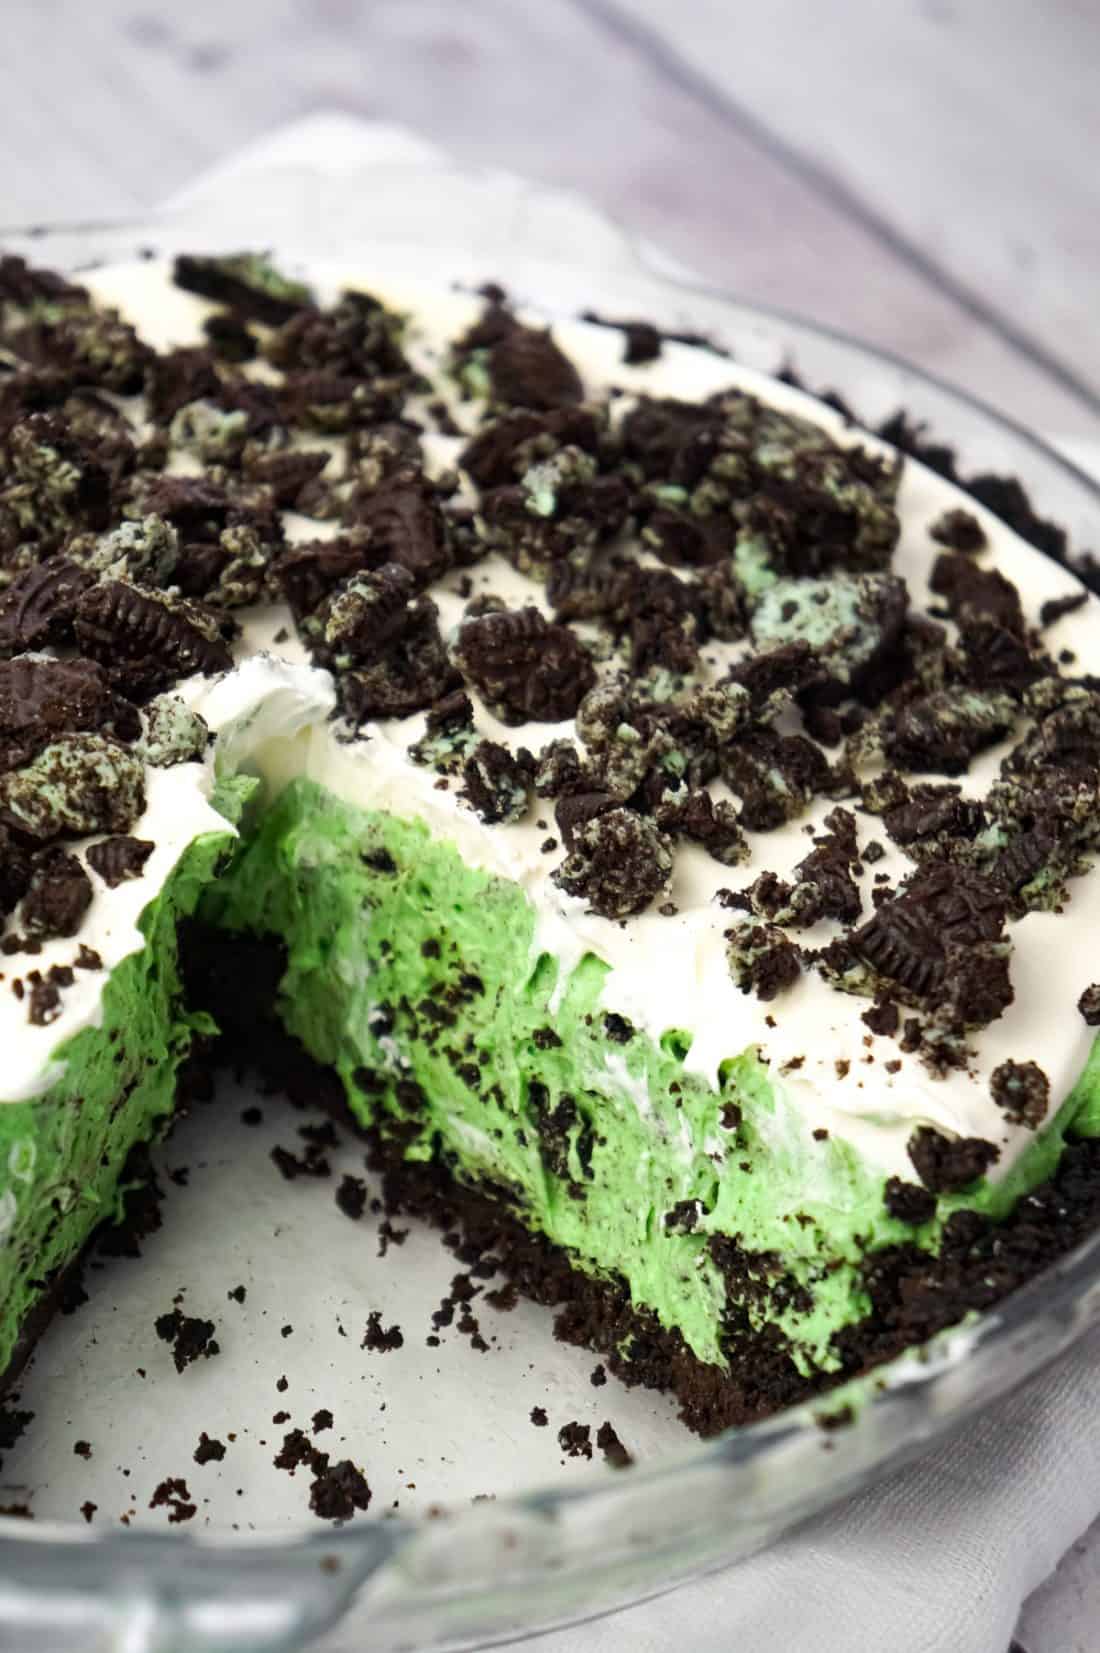 Mint Oreo Pie - THIS IS NOT DIET FOOD